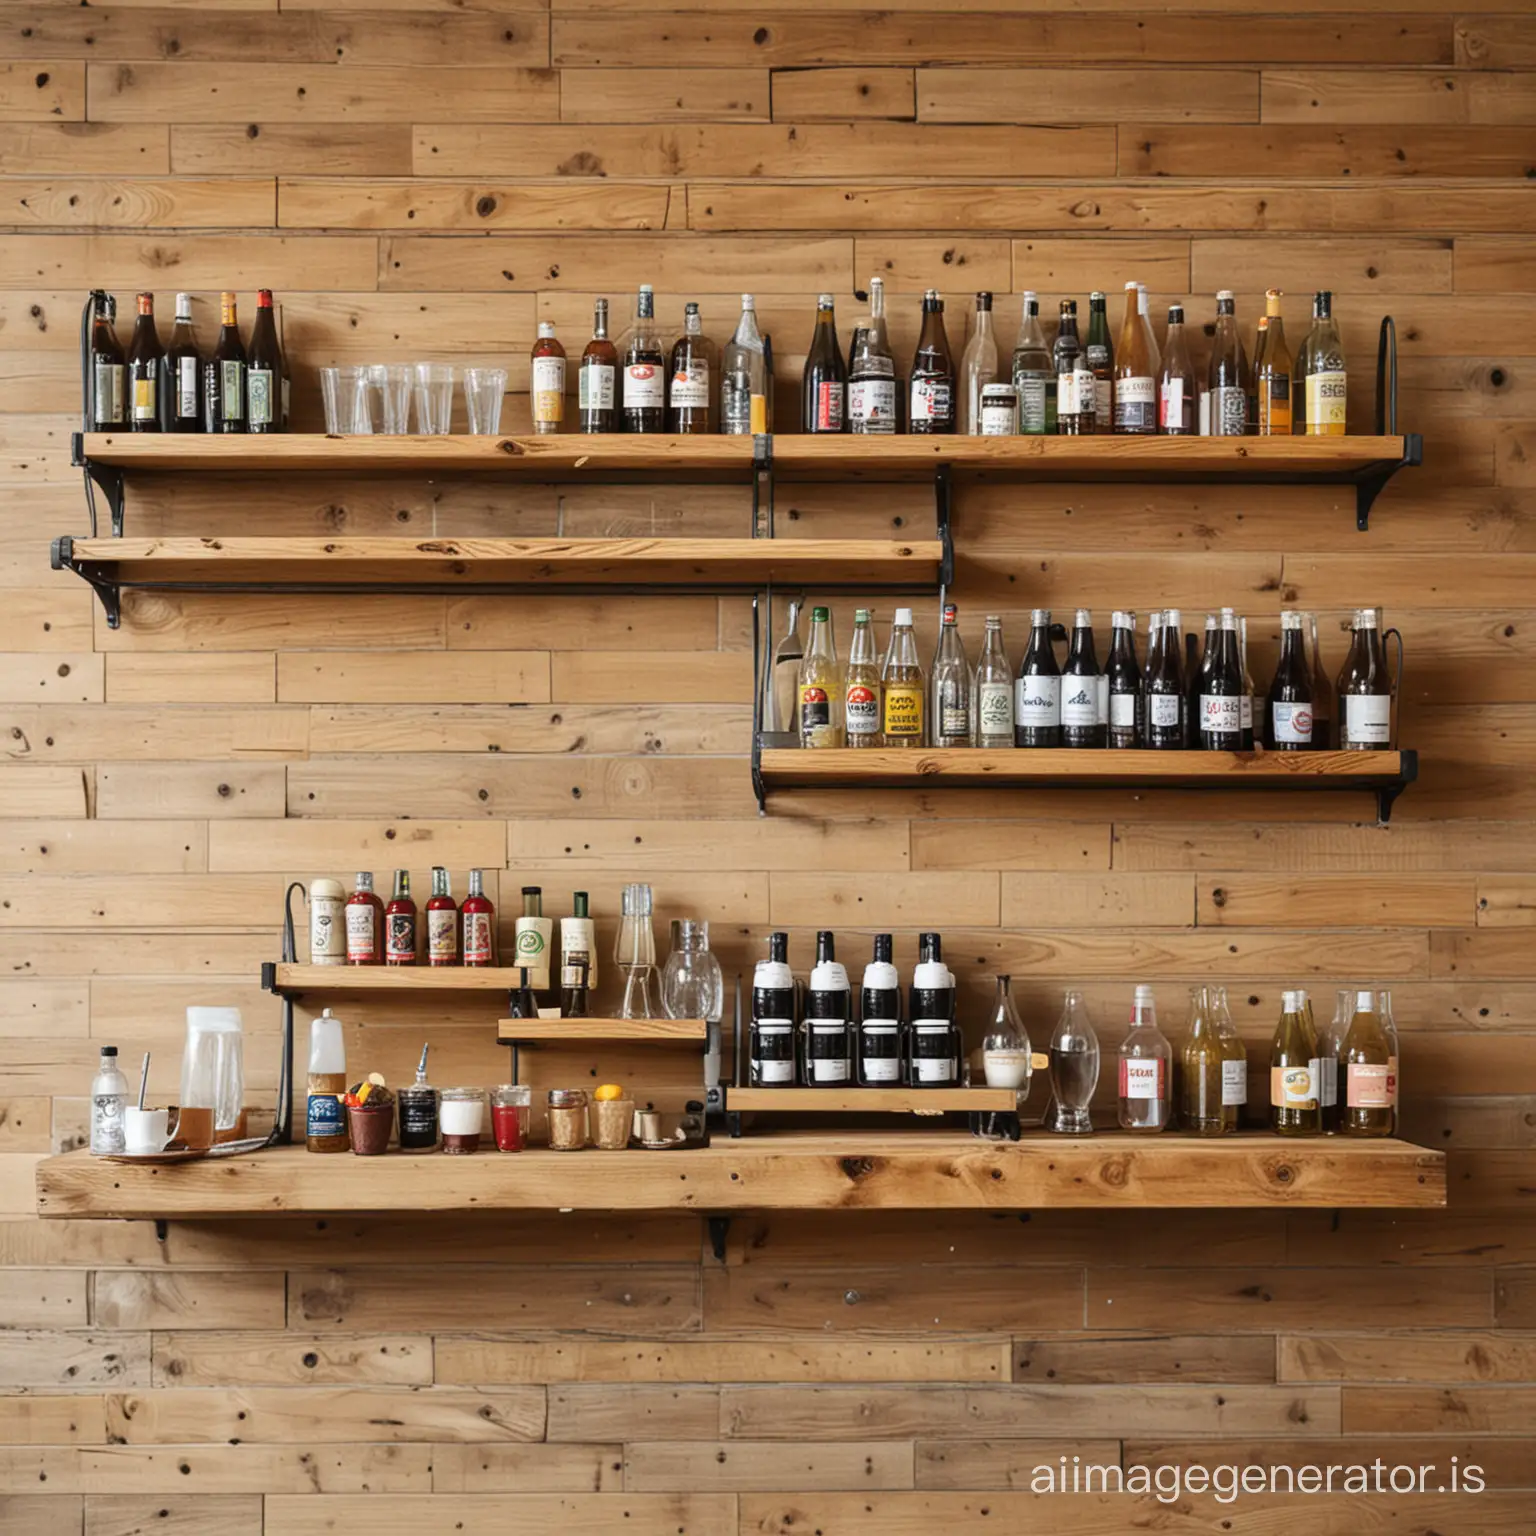 Cozy-Cafe-Scene-with-Beverages-and-Displayed-Food-on-Wooden-Wall-Shelves